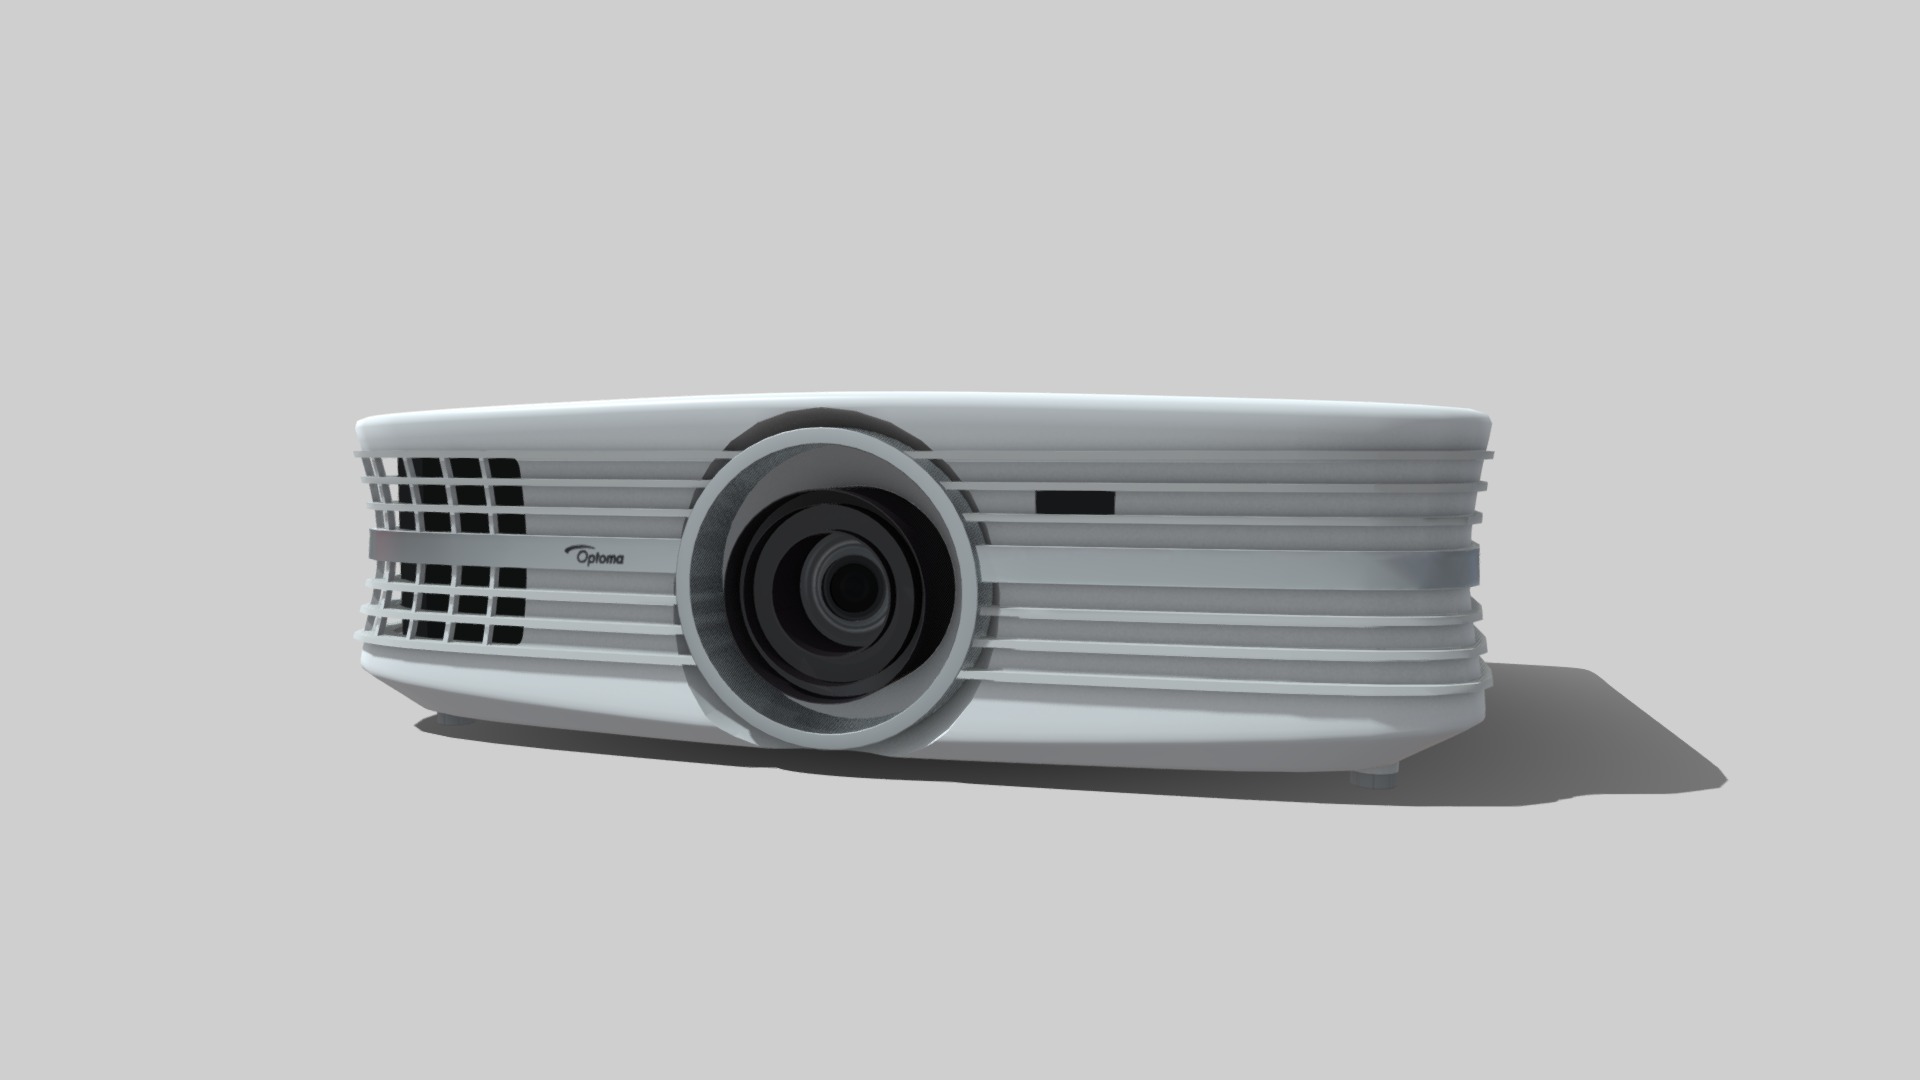 3D model Projector – Optoma DLP 4K - This is a 3D model of the Projector - Optoma DLP 4K. The 3D model is about a white and silver camera.